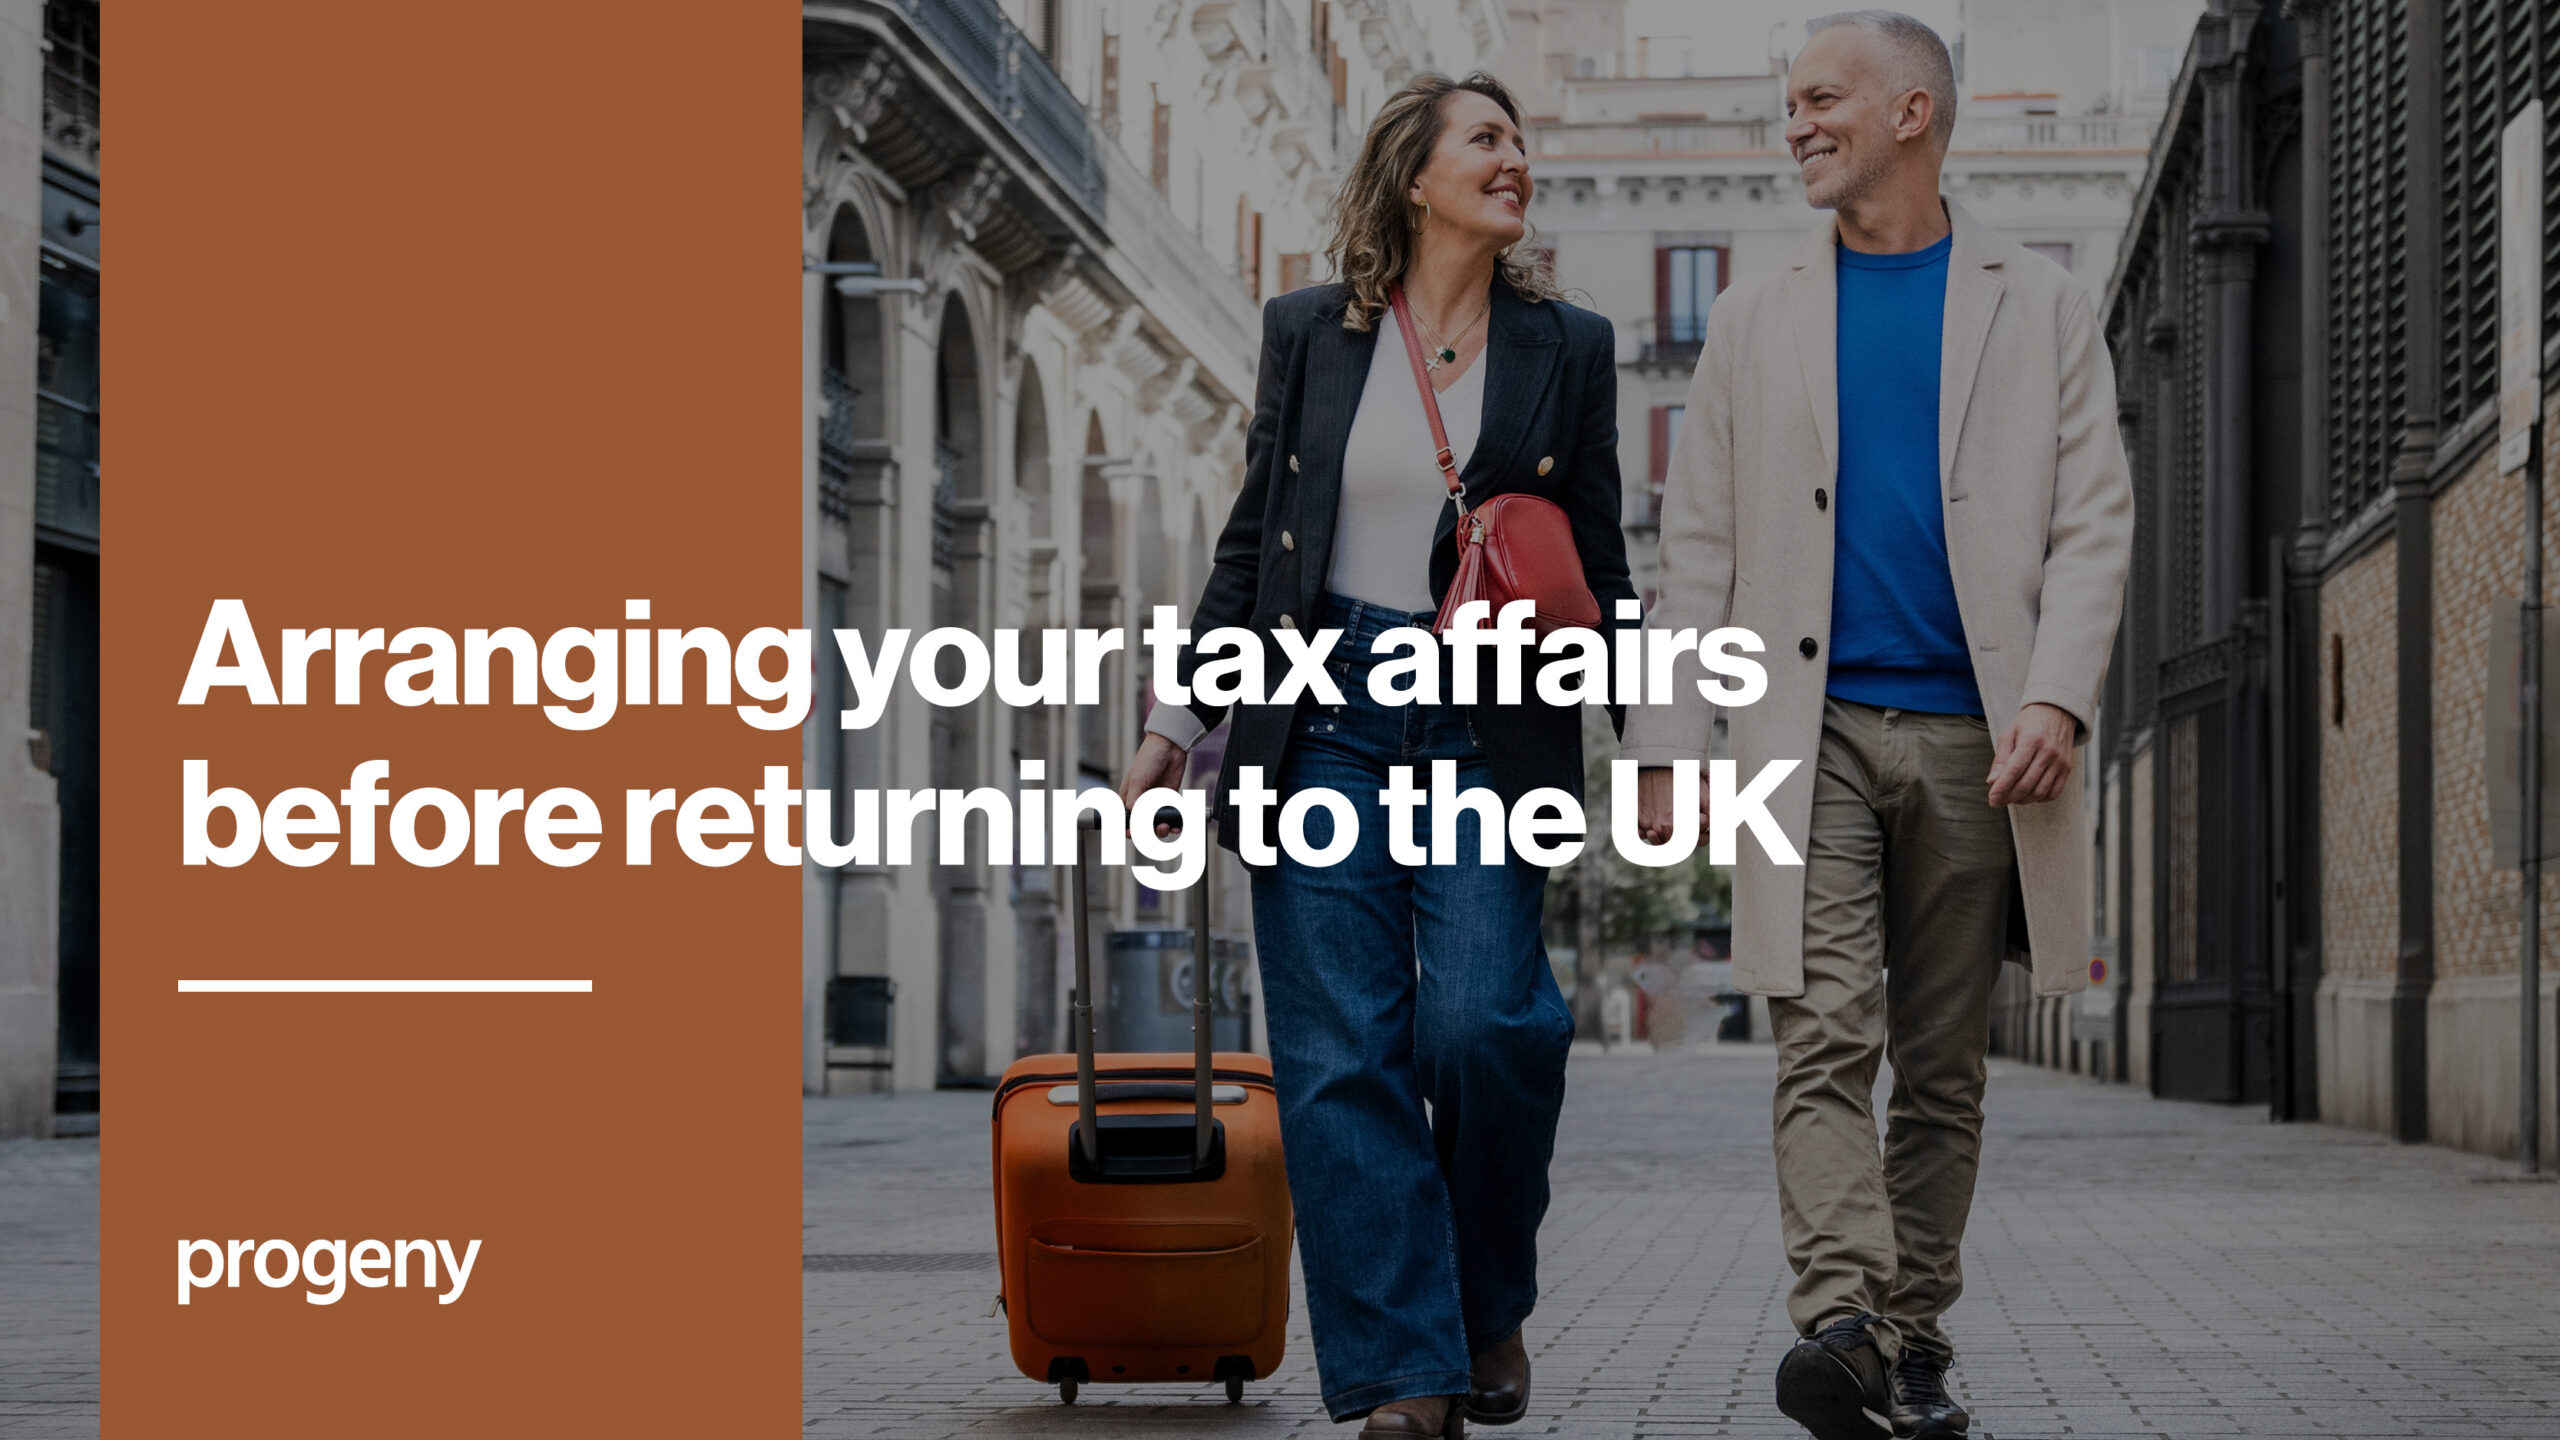 Arranging your tax affairs before returning to the UK